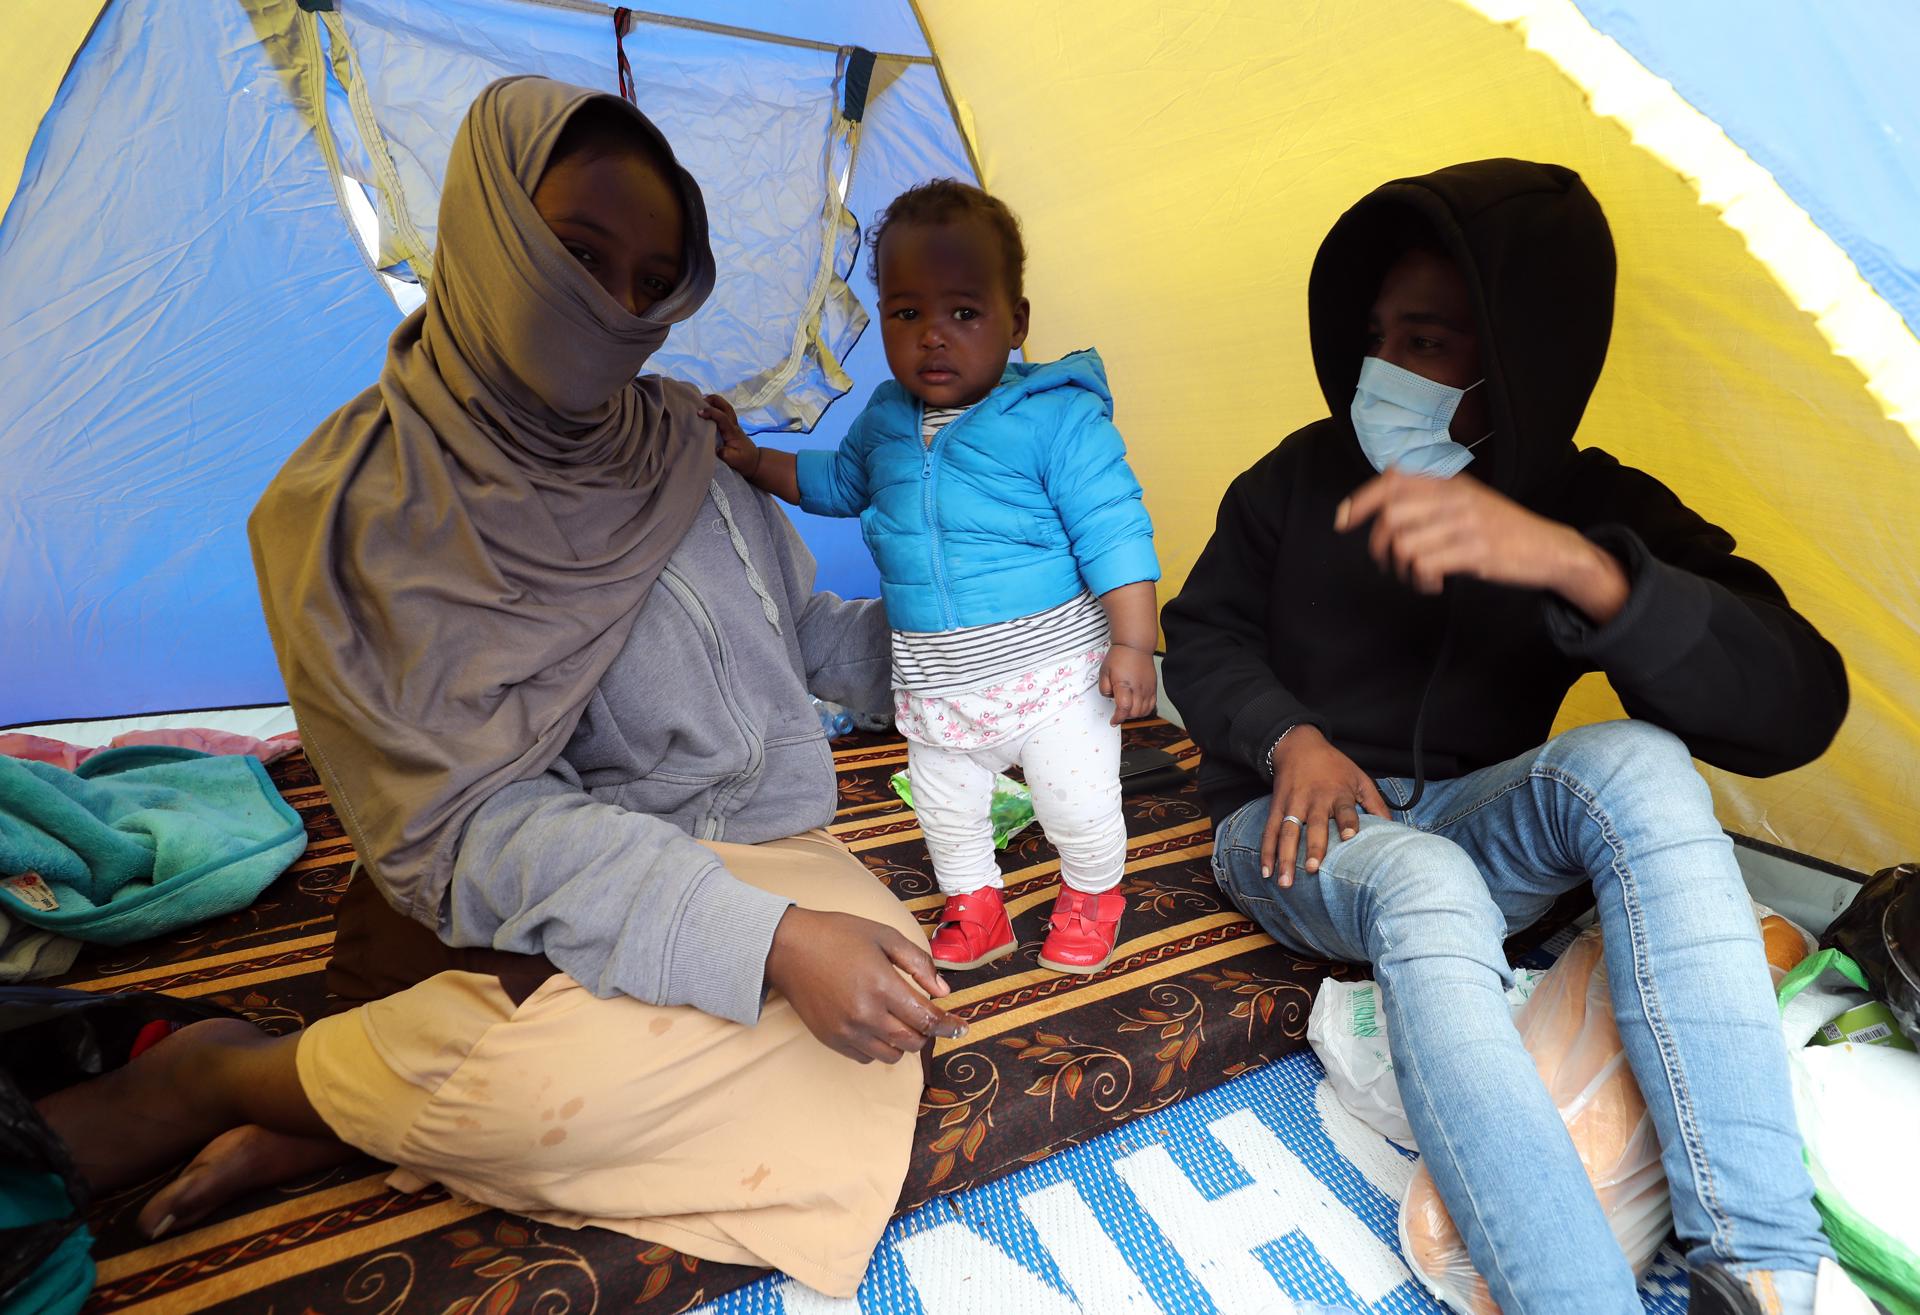 Sub-Saharan African migrants sit in tents outside the headquarters of the International Organization for Migration (IOM) to demand their evacuation to their country of origin in Tunis, Tunisia, 22 March 2023.EFE/EPA/MOHAMED MESSARA